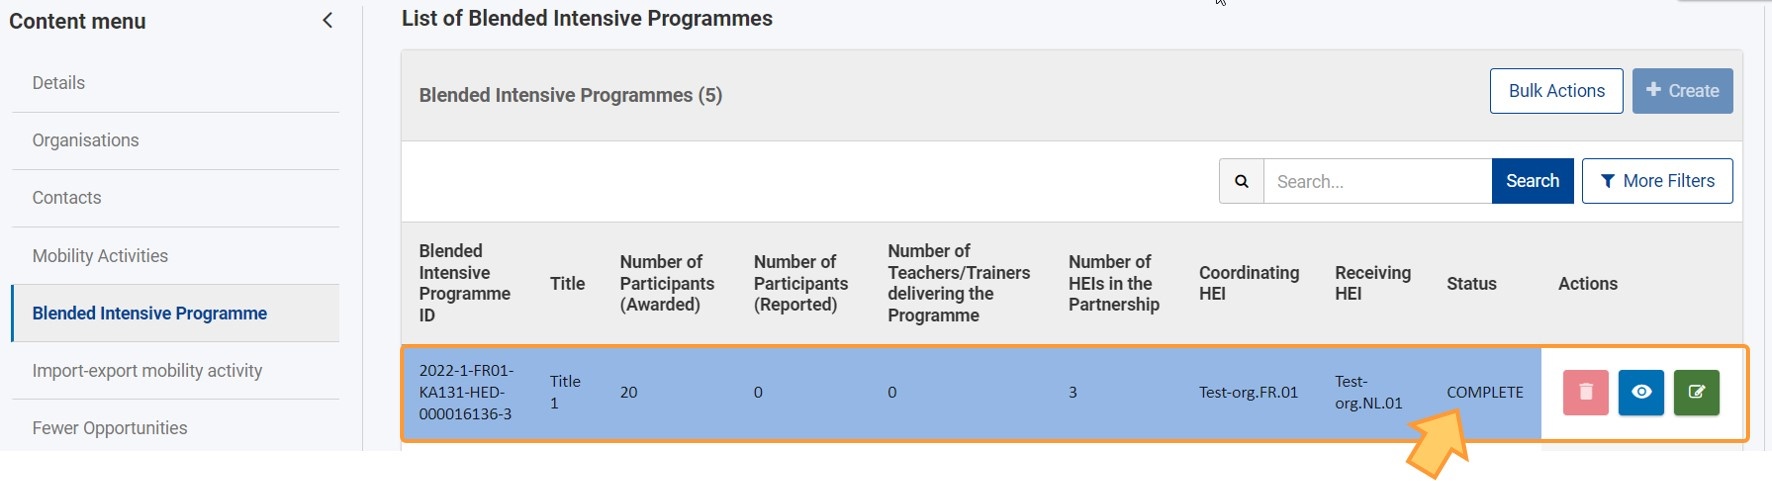 Status of the Blended Intensive Programme is updated to Complete